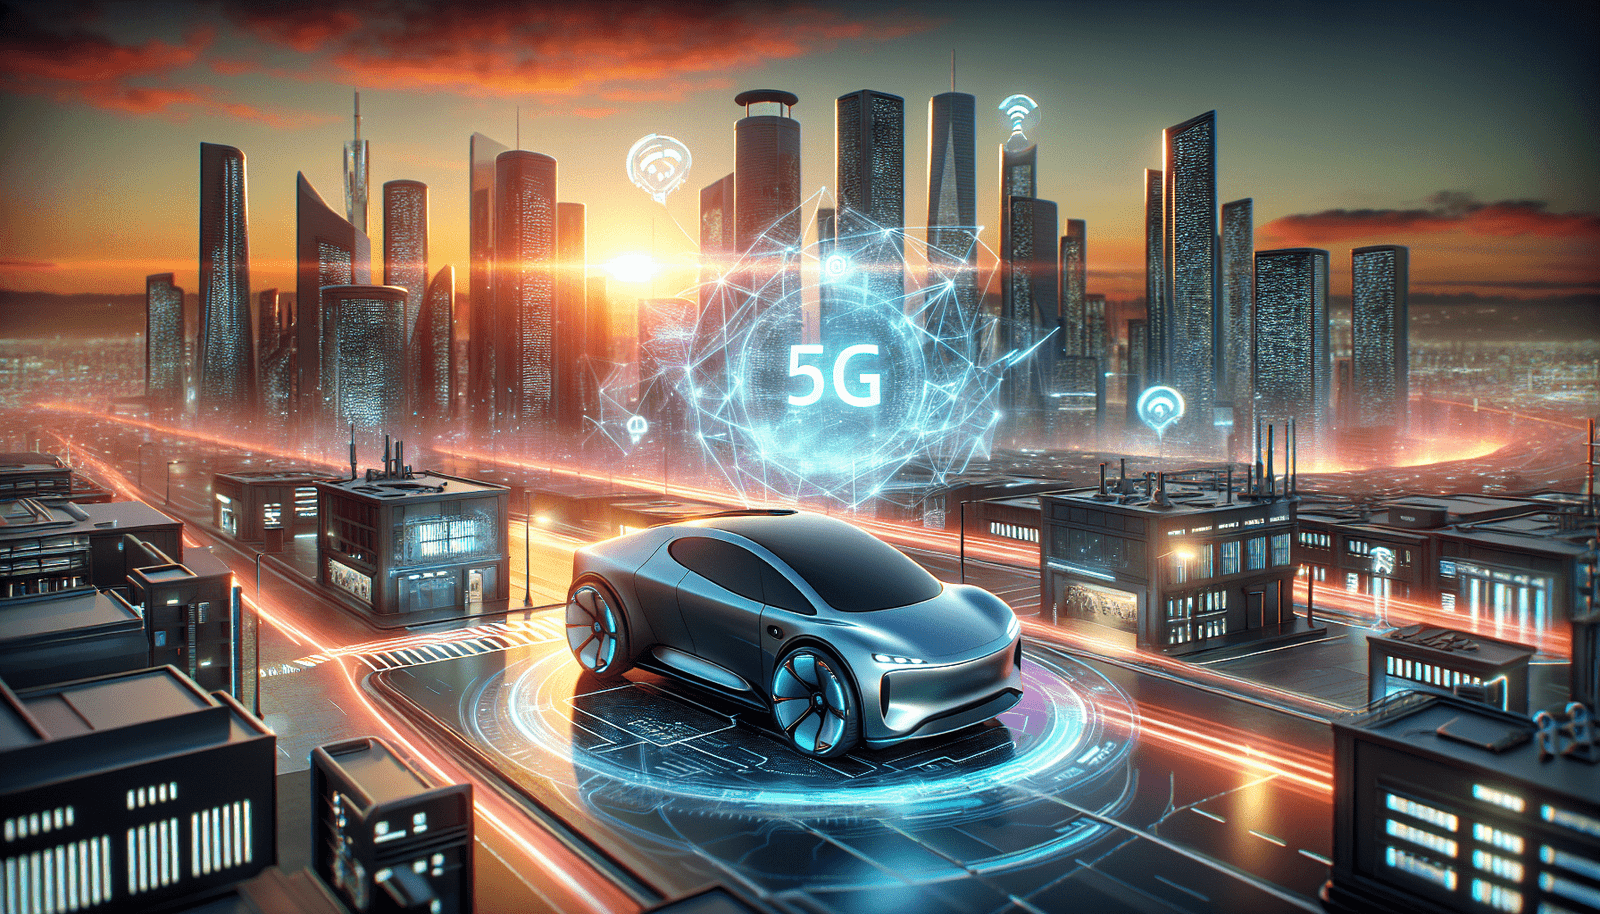 What Is The Impact Of 5G Technology On Electric Vehicle Connectivity?